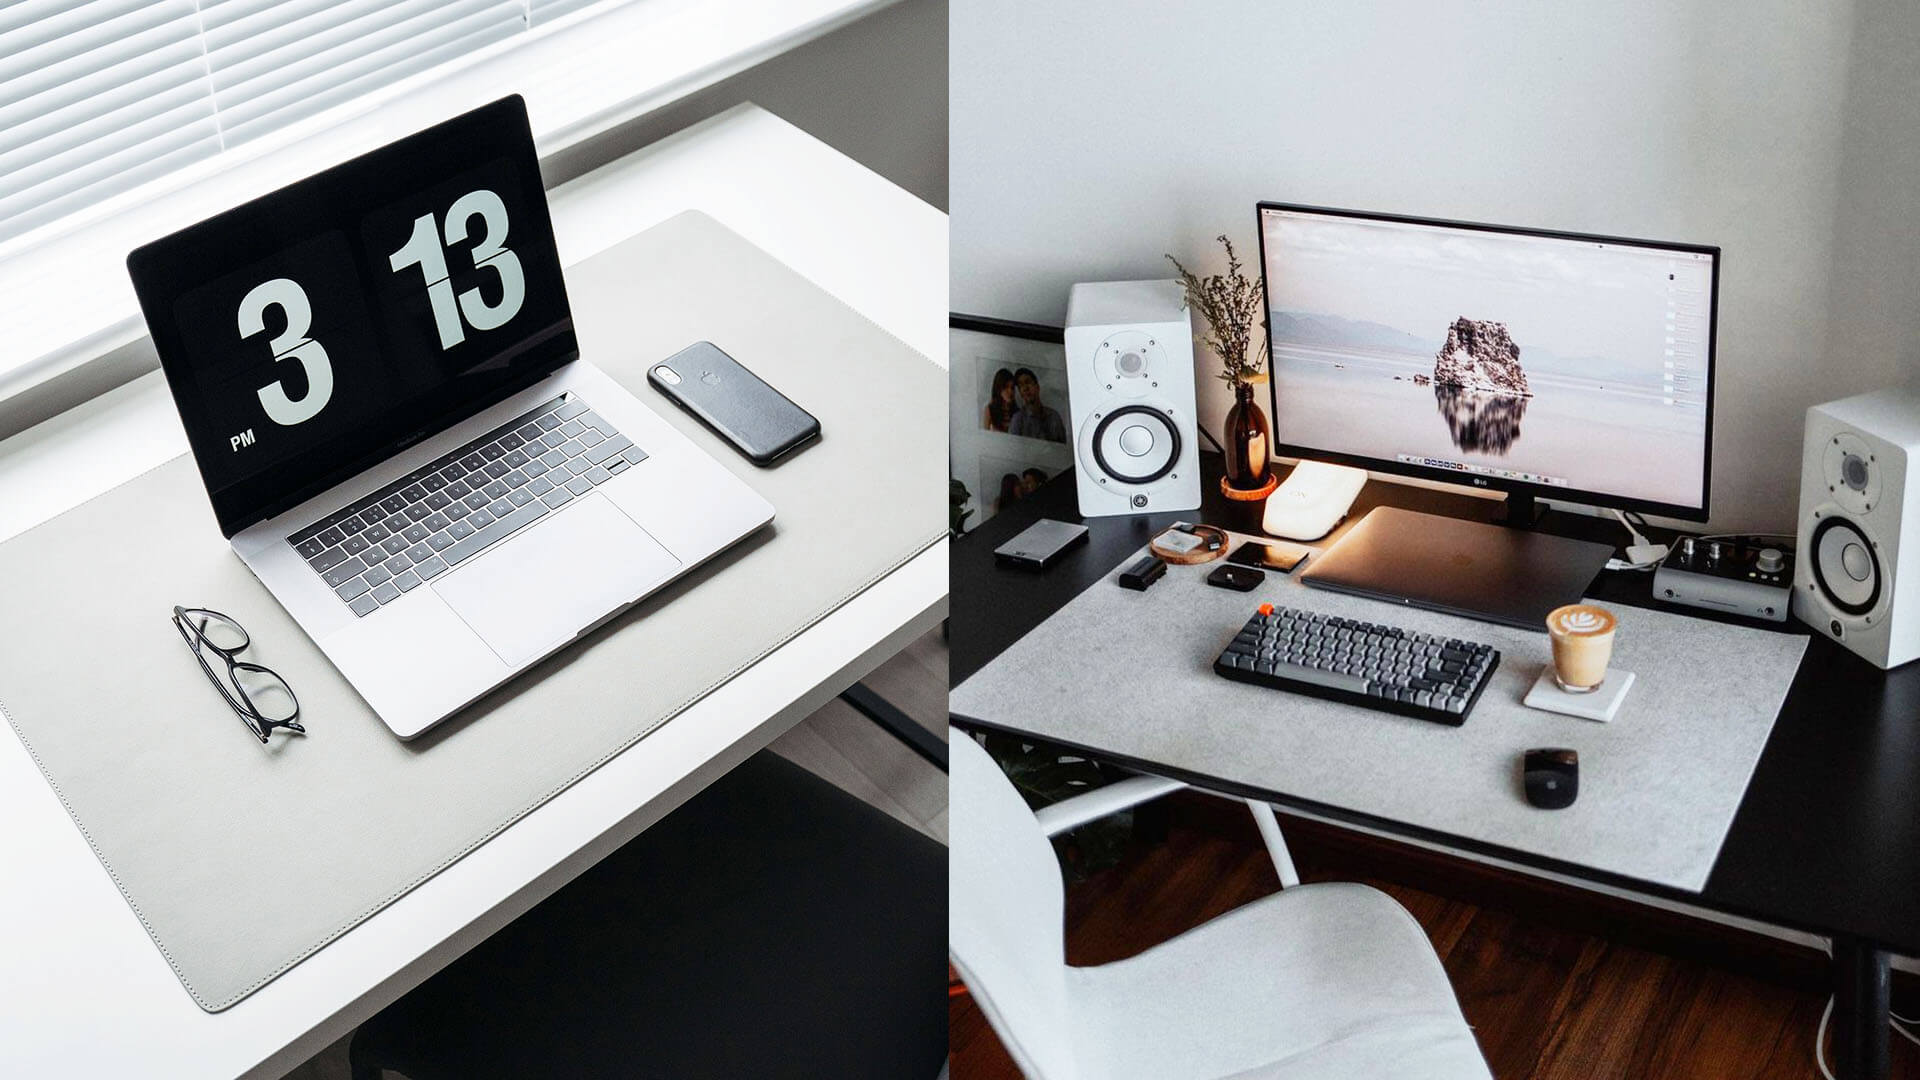 15 Desk Cover Ideas Pads To, Extra Large Clear Desk Protector